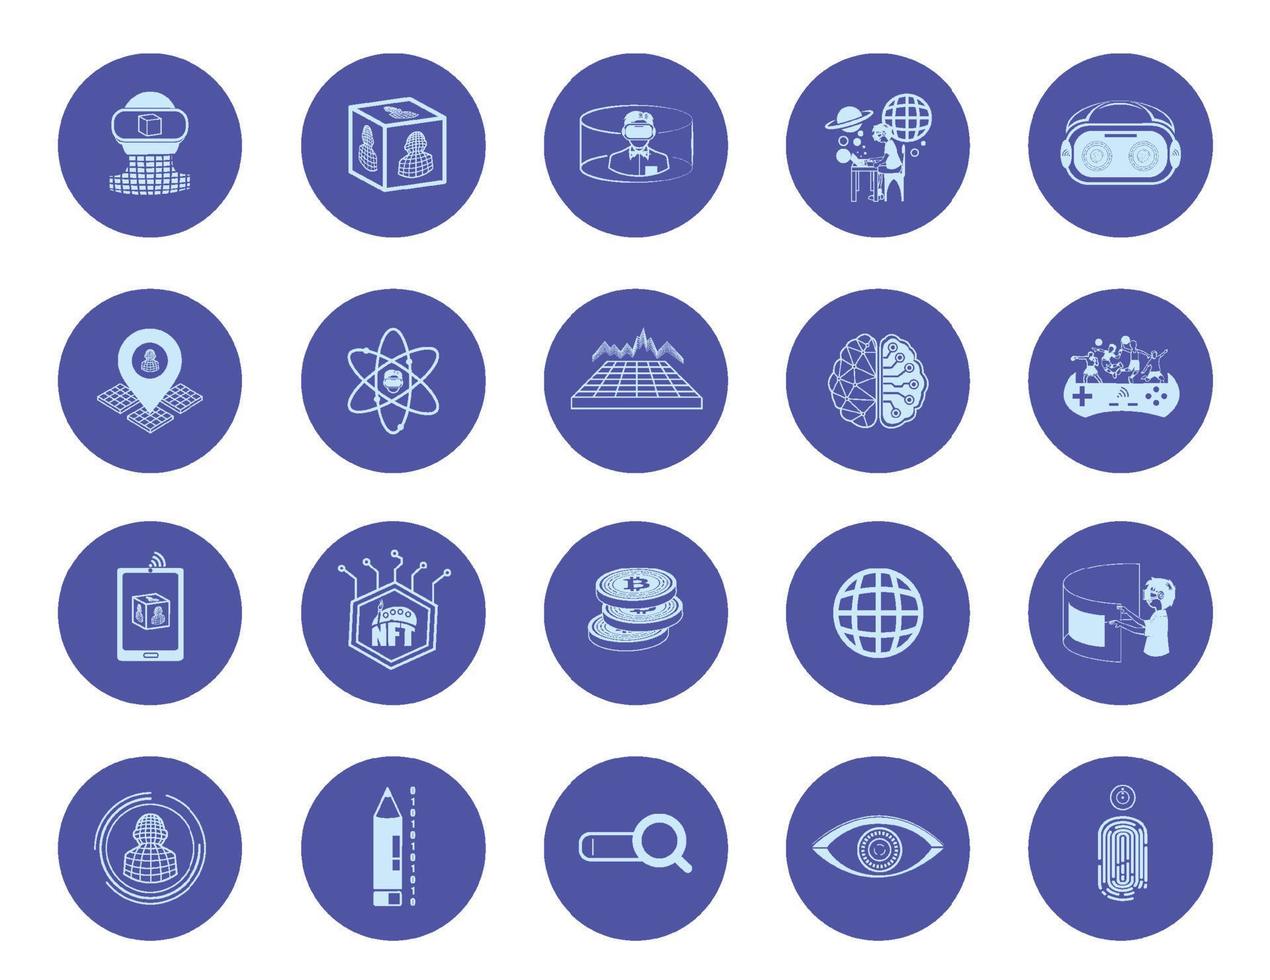 Illustration of metaverse icons set with modern color vector